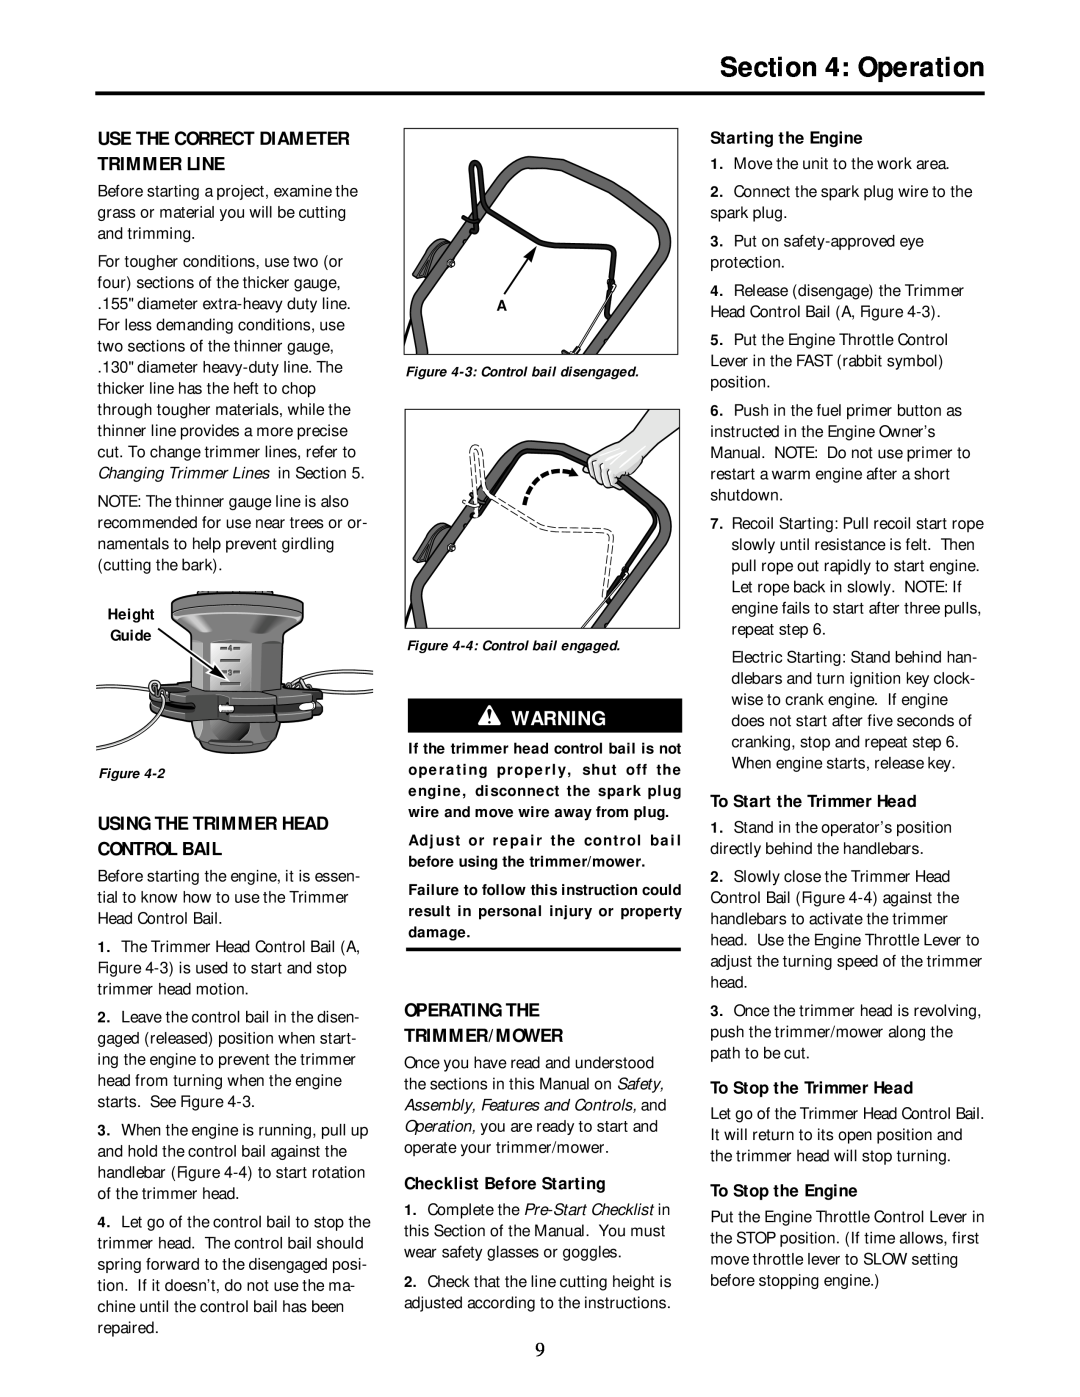 Troy-Bilt 52058, 52057 owner manual Operation, Using The Trimmer Head Control Bail, Operating The Trimmer/Mower 